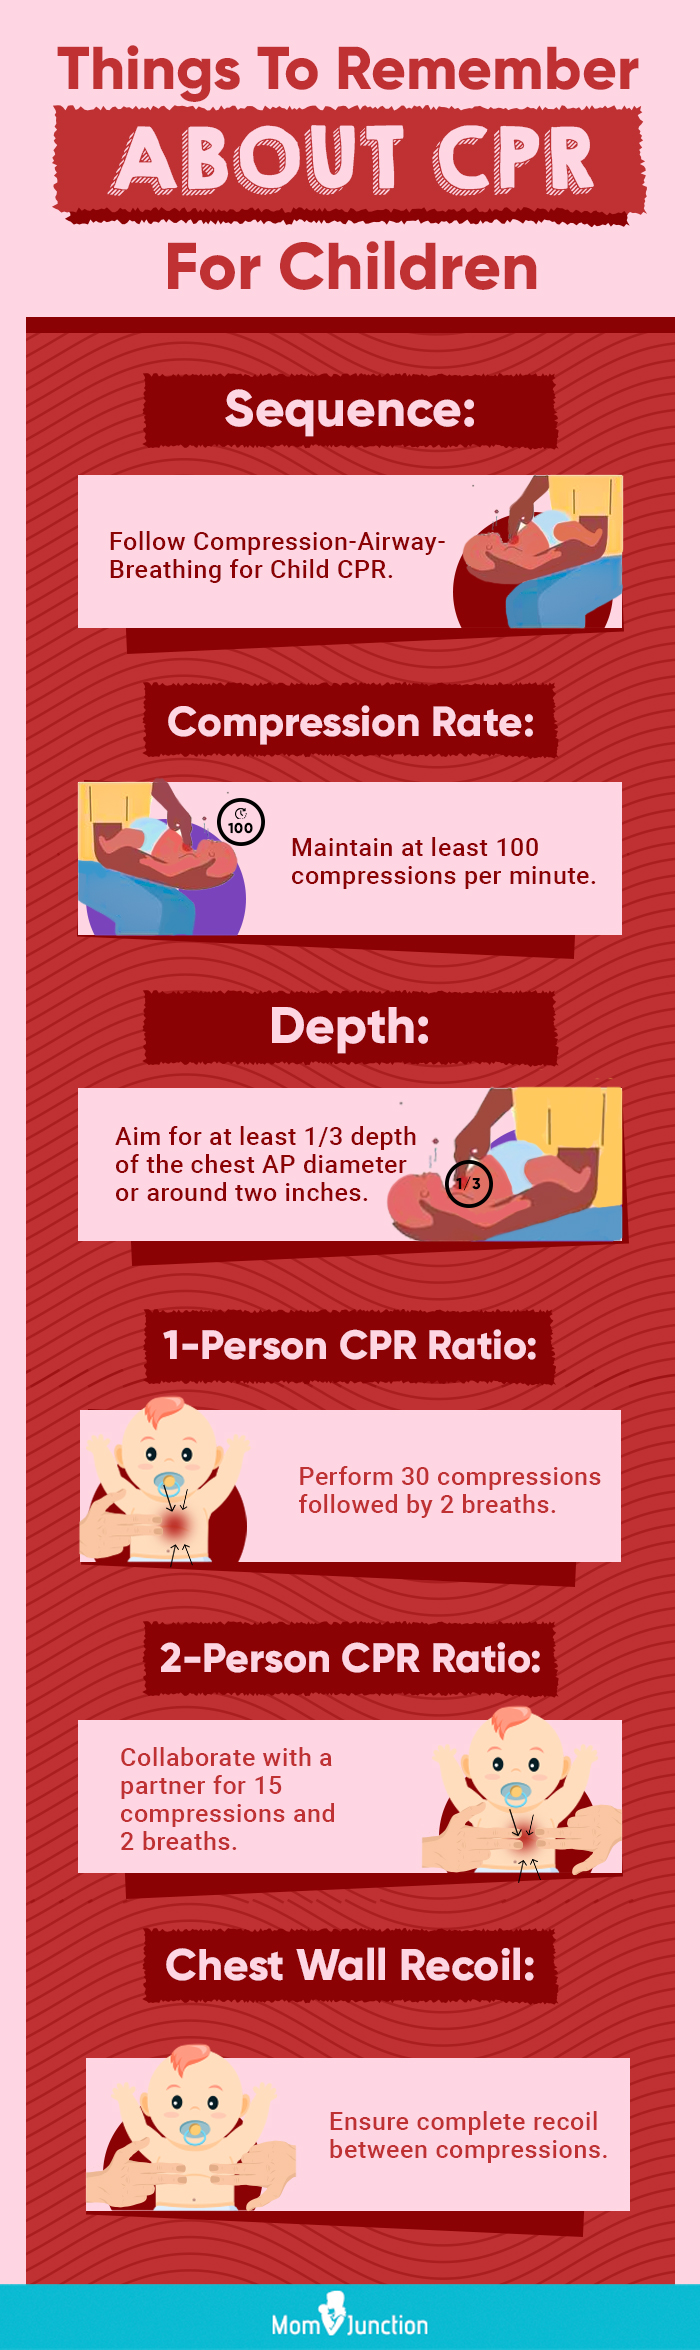 things to remember about cpr for children (infographic)